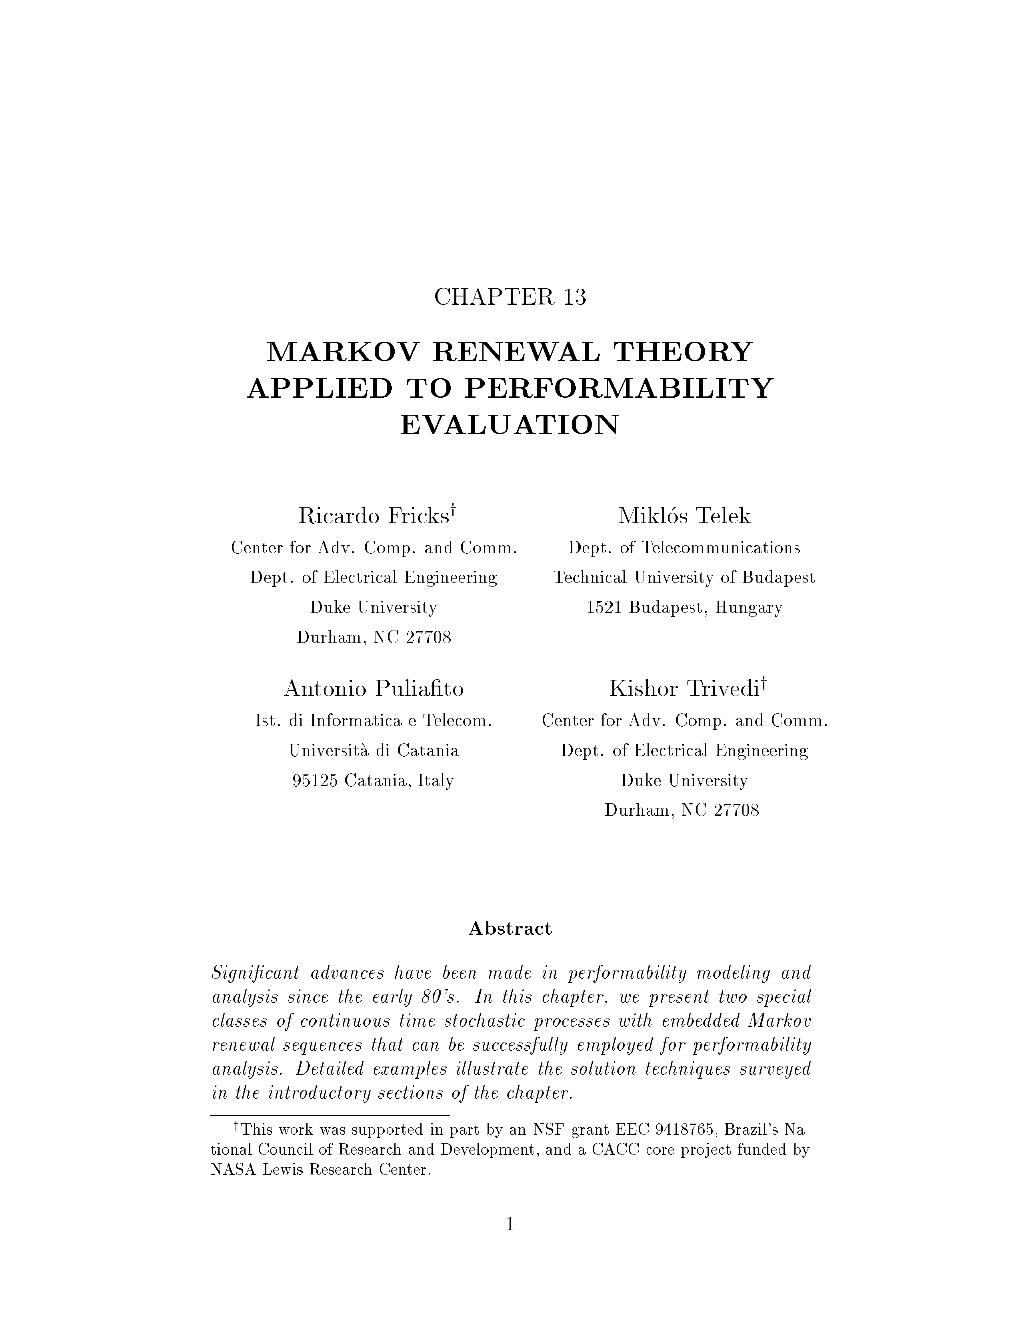 Markov Renewal Theory Applied to Performability